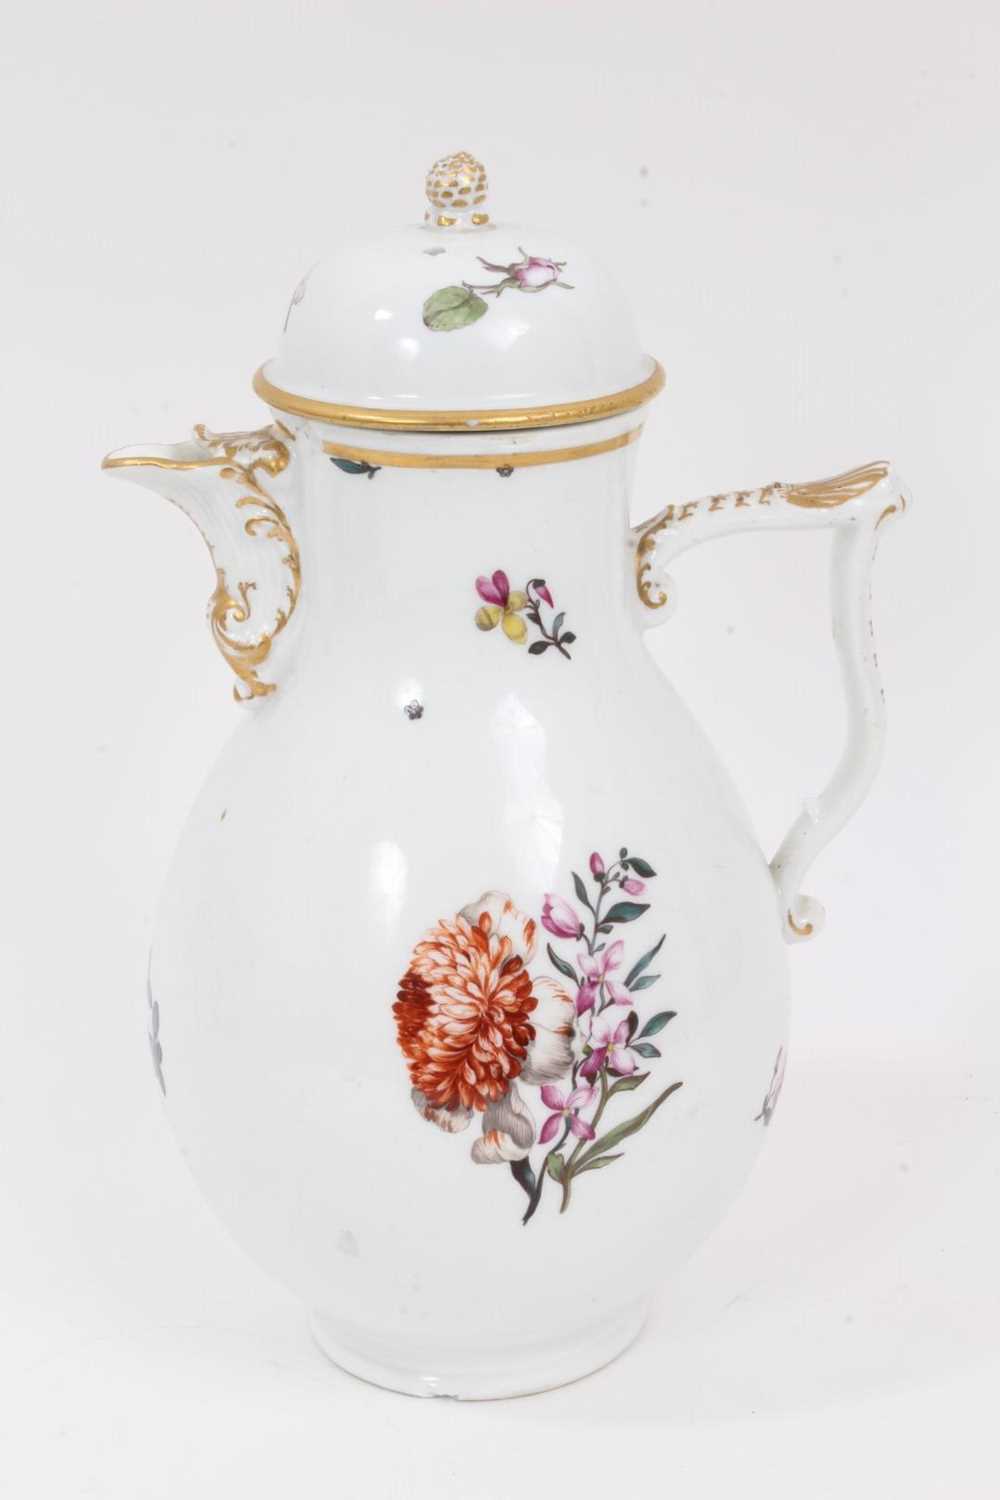 Lot 290 - A Meissen coffee pot, circa 1740, polychrome painted with floral sprays, with Tau handle and scrolled spout, crossed swords mark, 23.5cm high